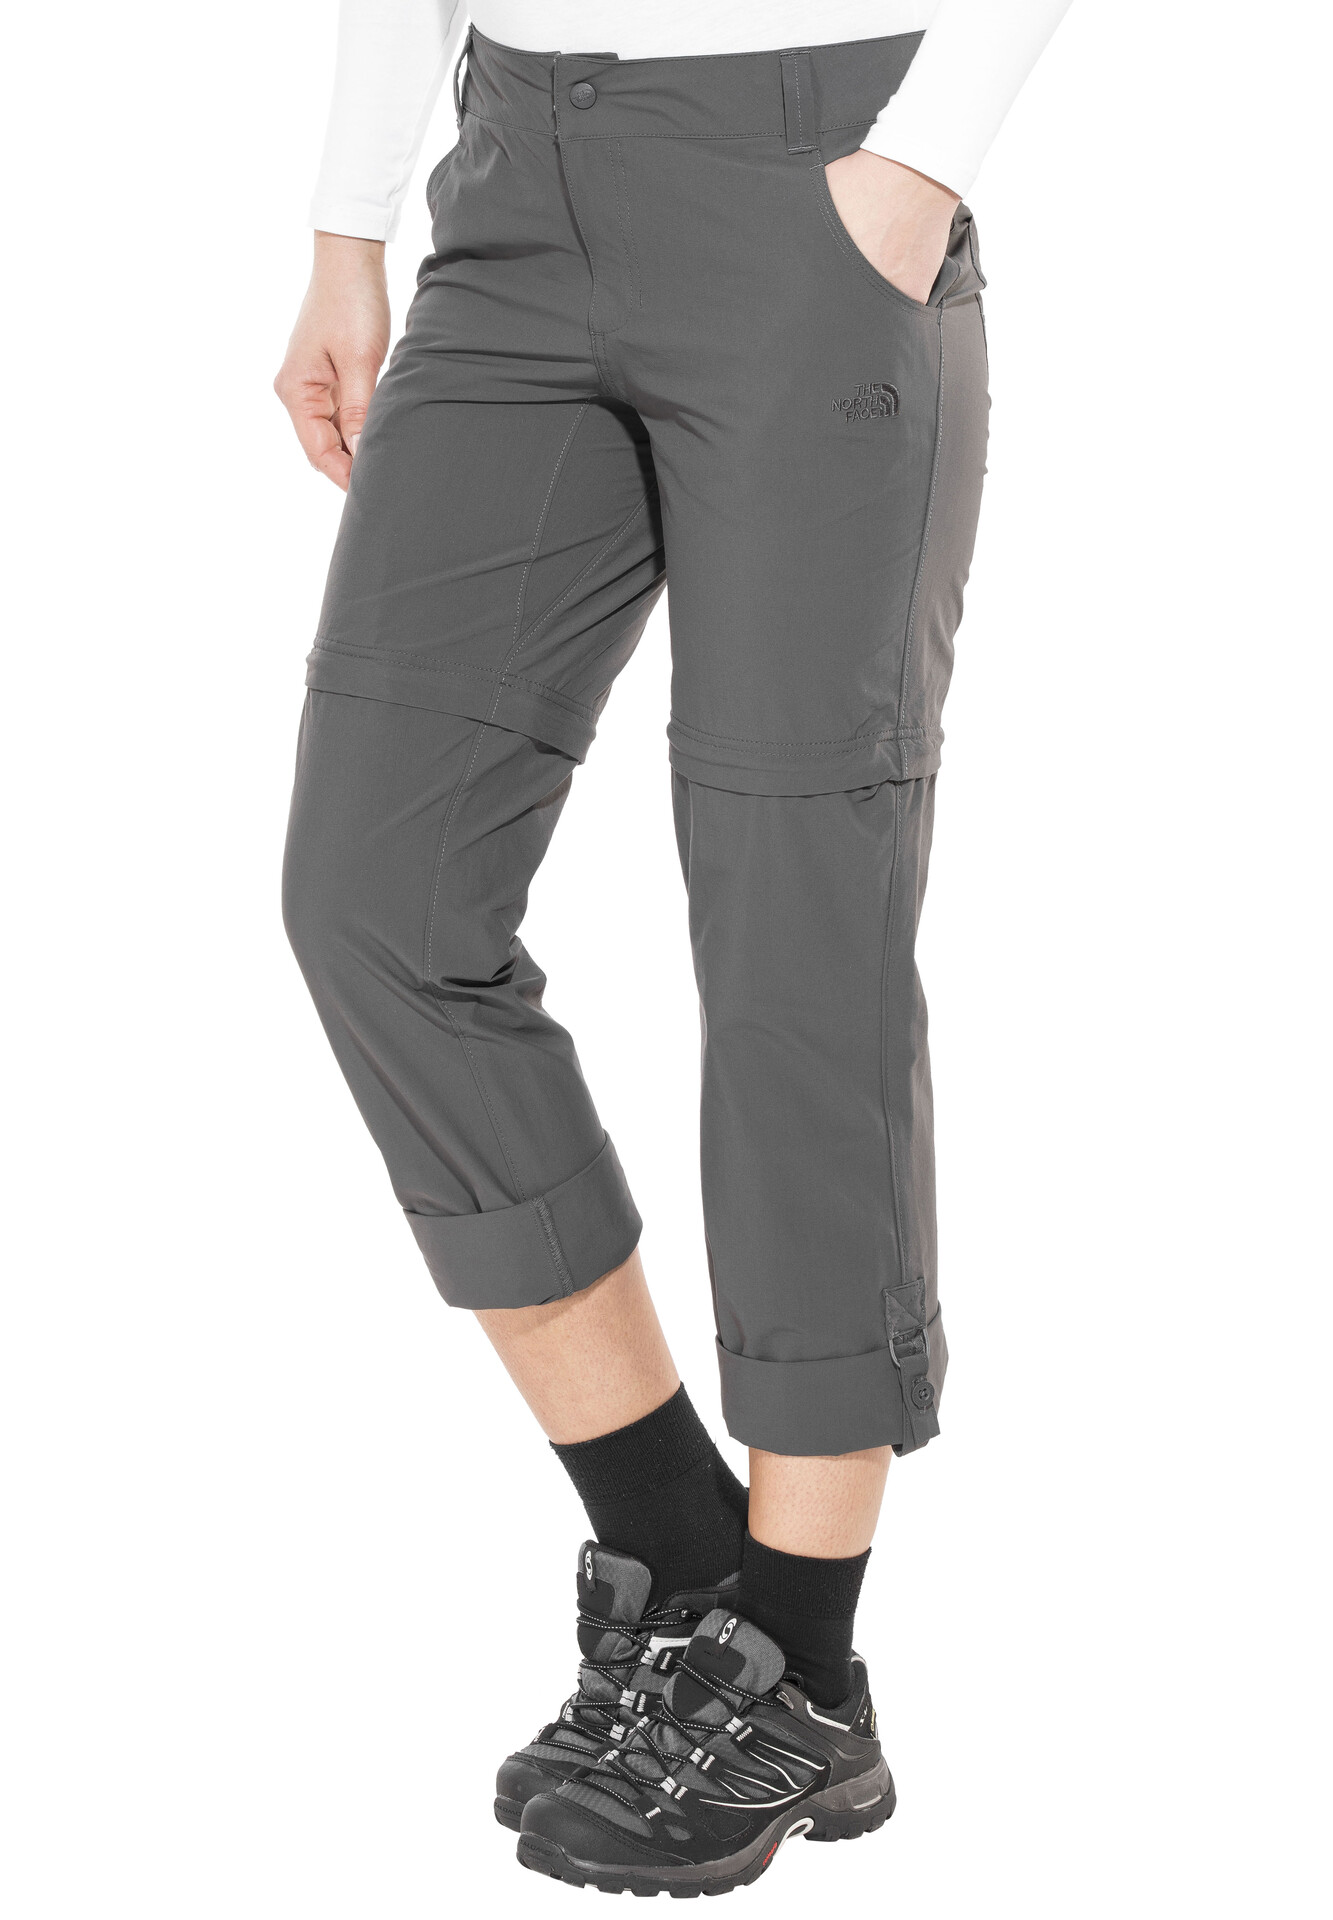 north face women's exploration convertible trousers